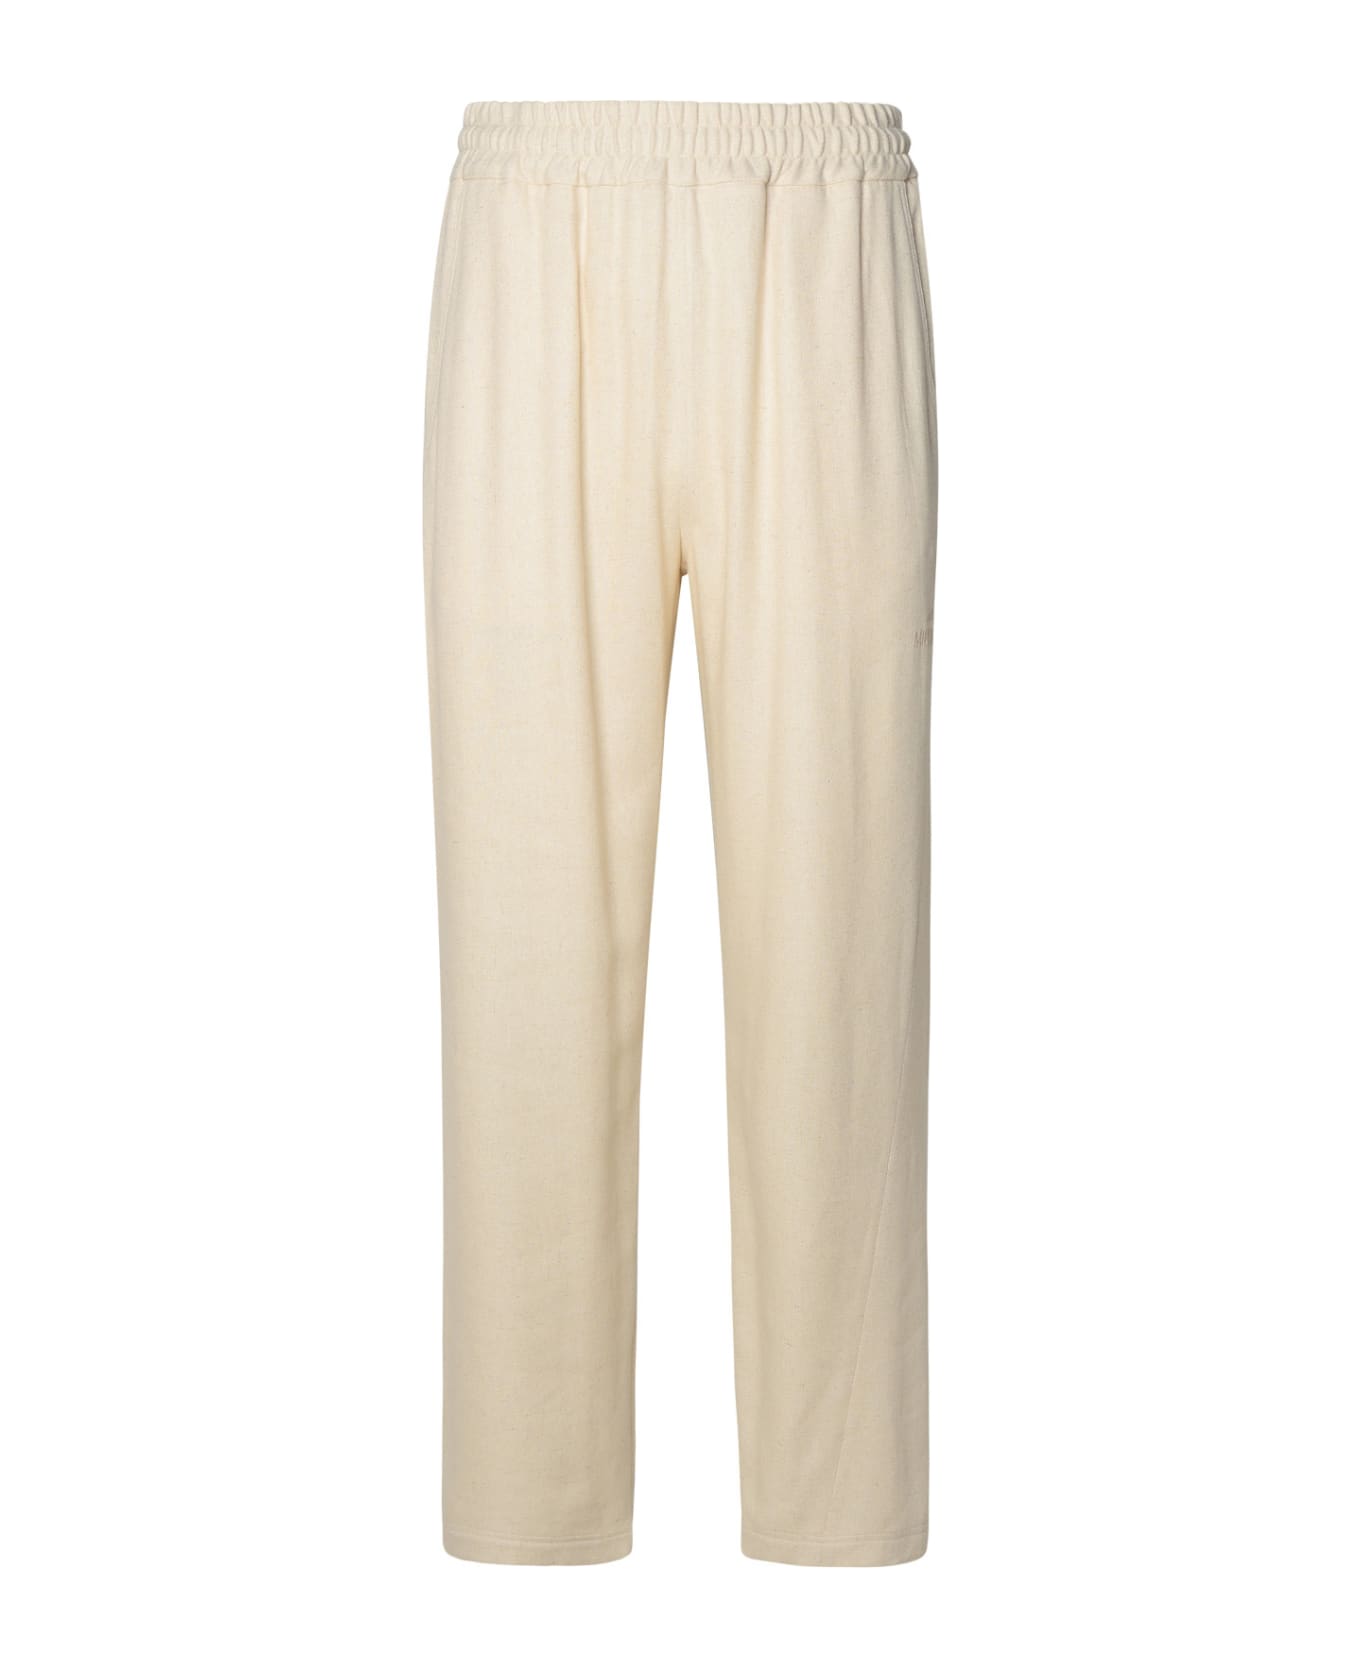 GCDS Ivory Linen Blend Trousers - Ivory ボトムス